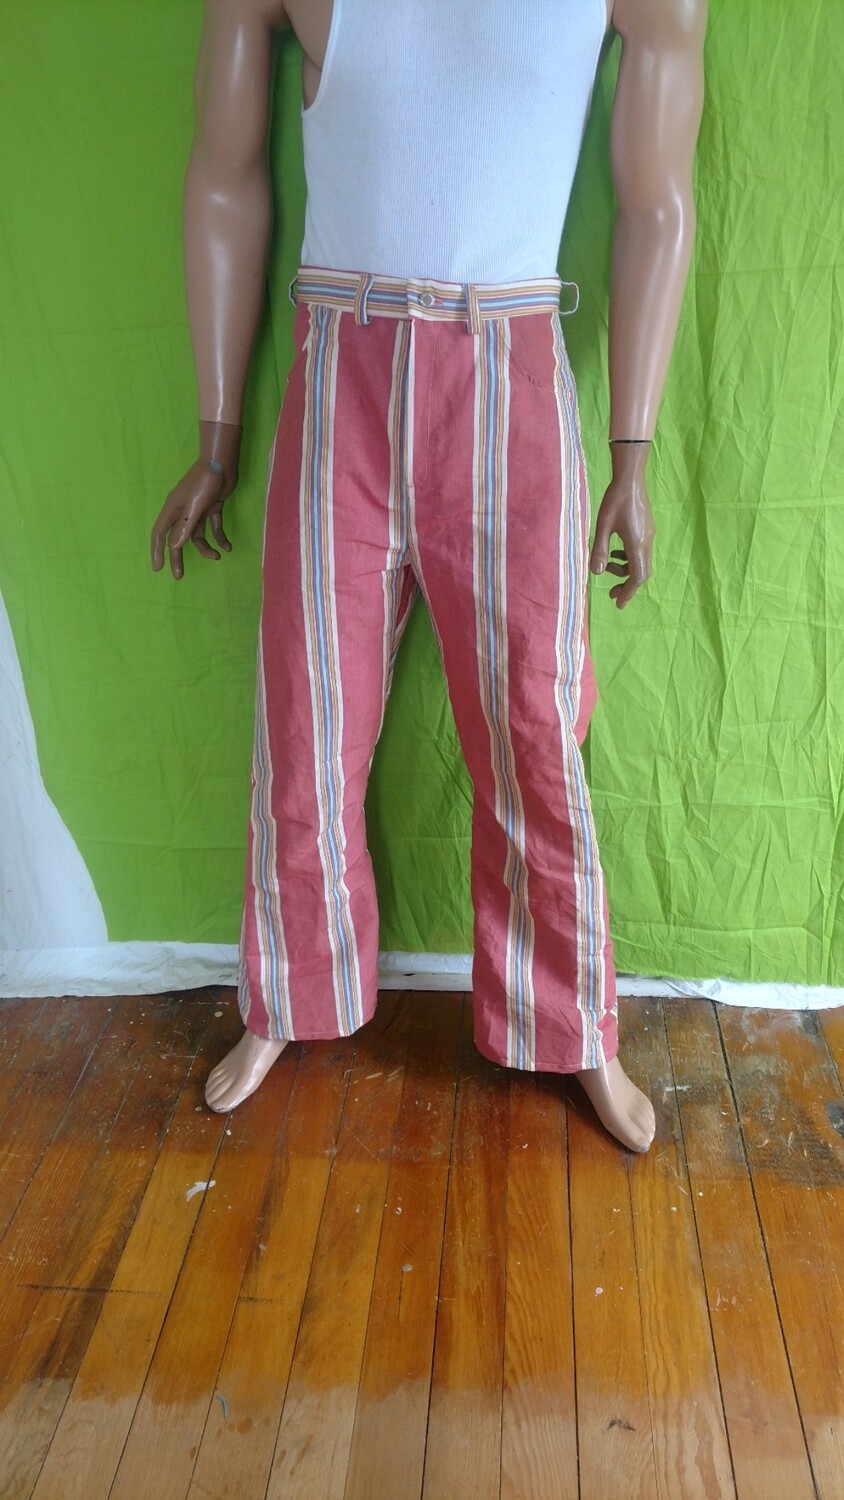 Men's Striped pink high waisted bell bottom pants Jeans 33"